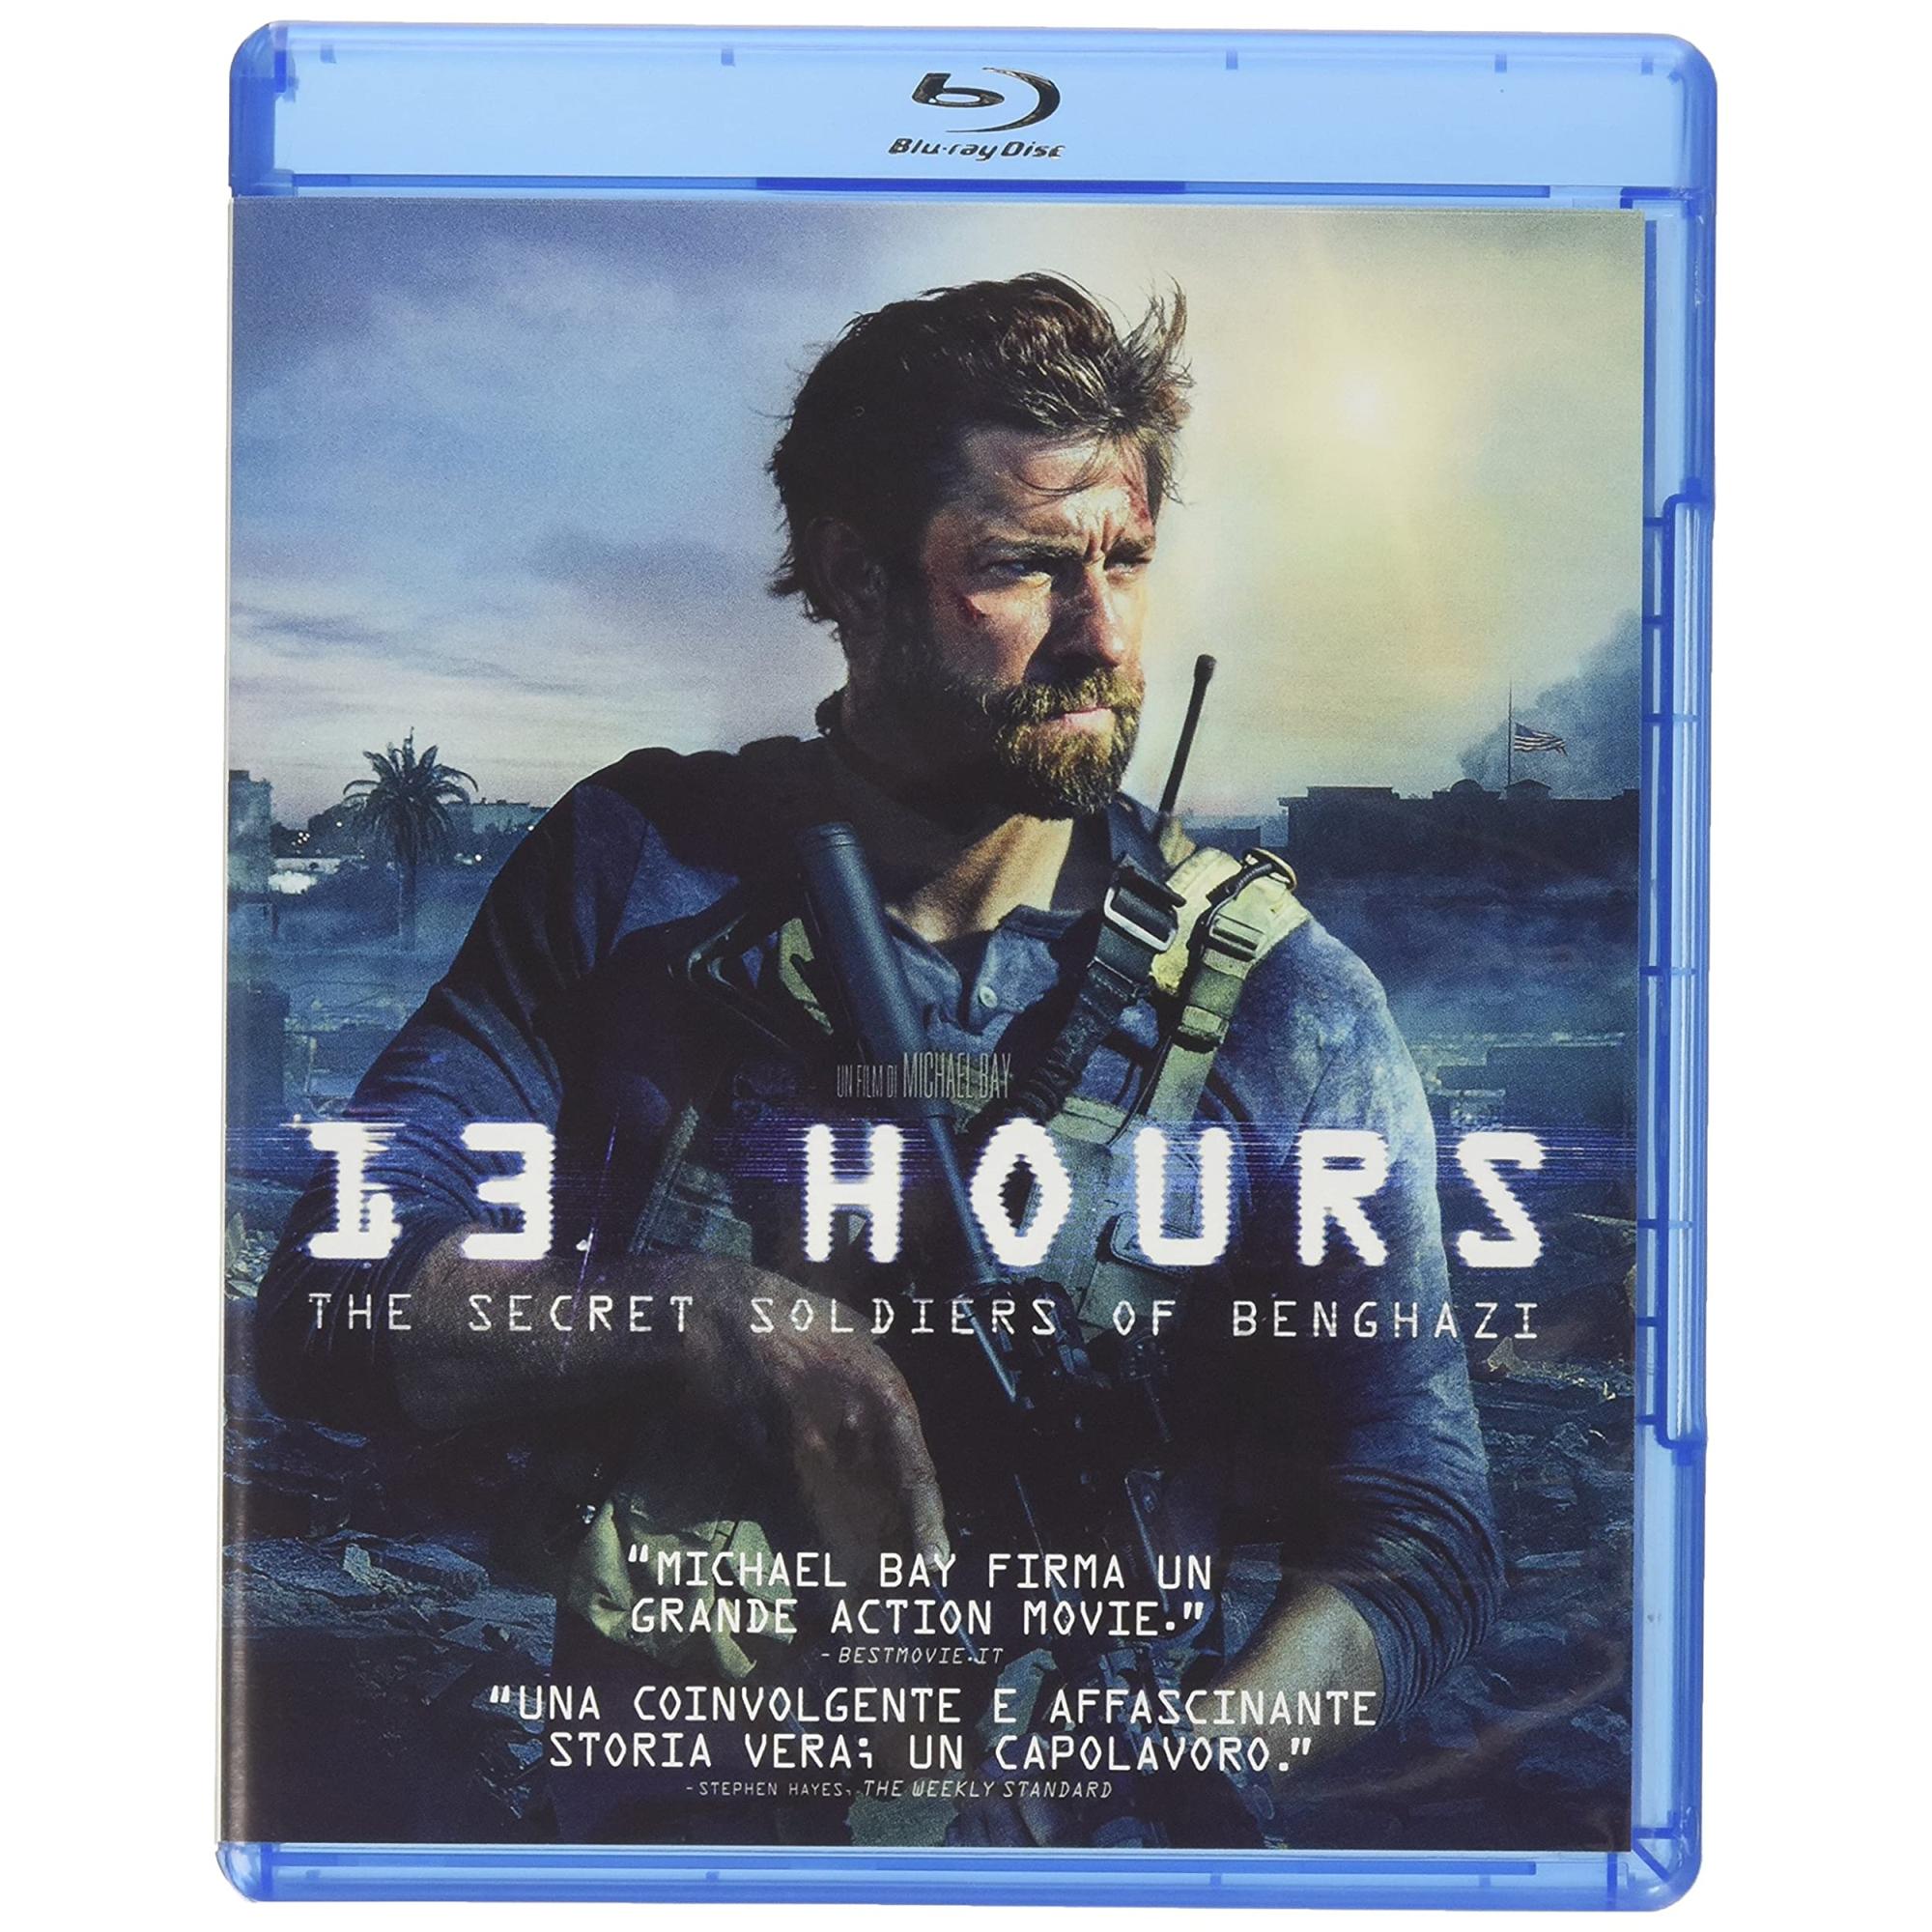 13 HOURS: THE SECRECT SOLDIERS OF BENGHAZI